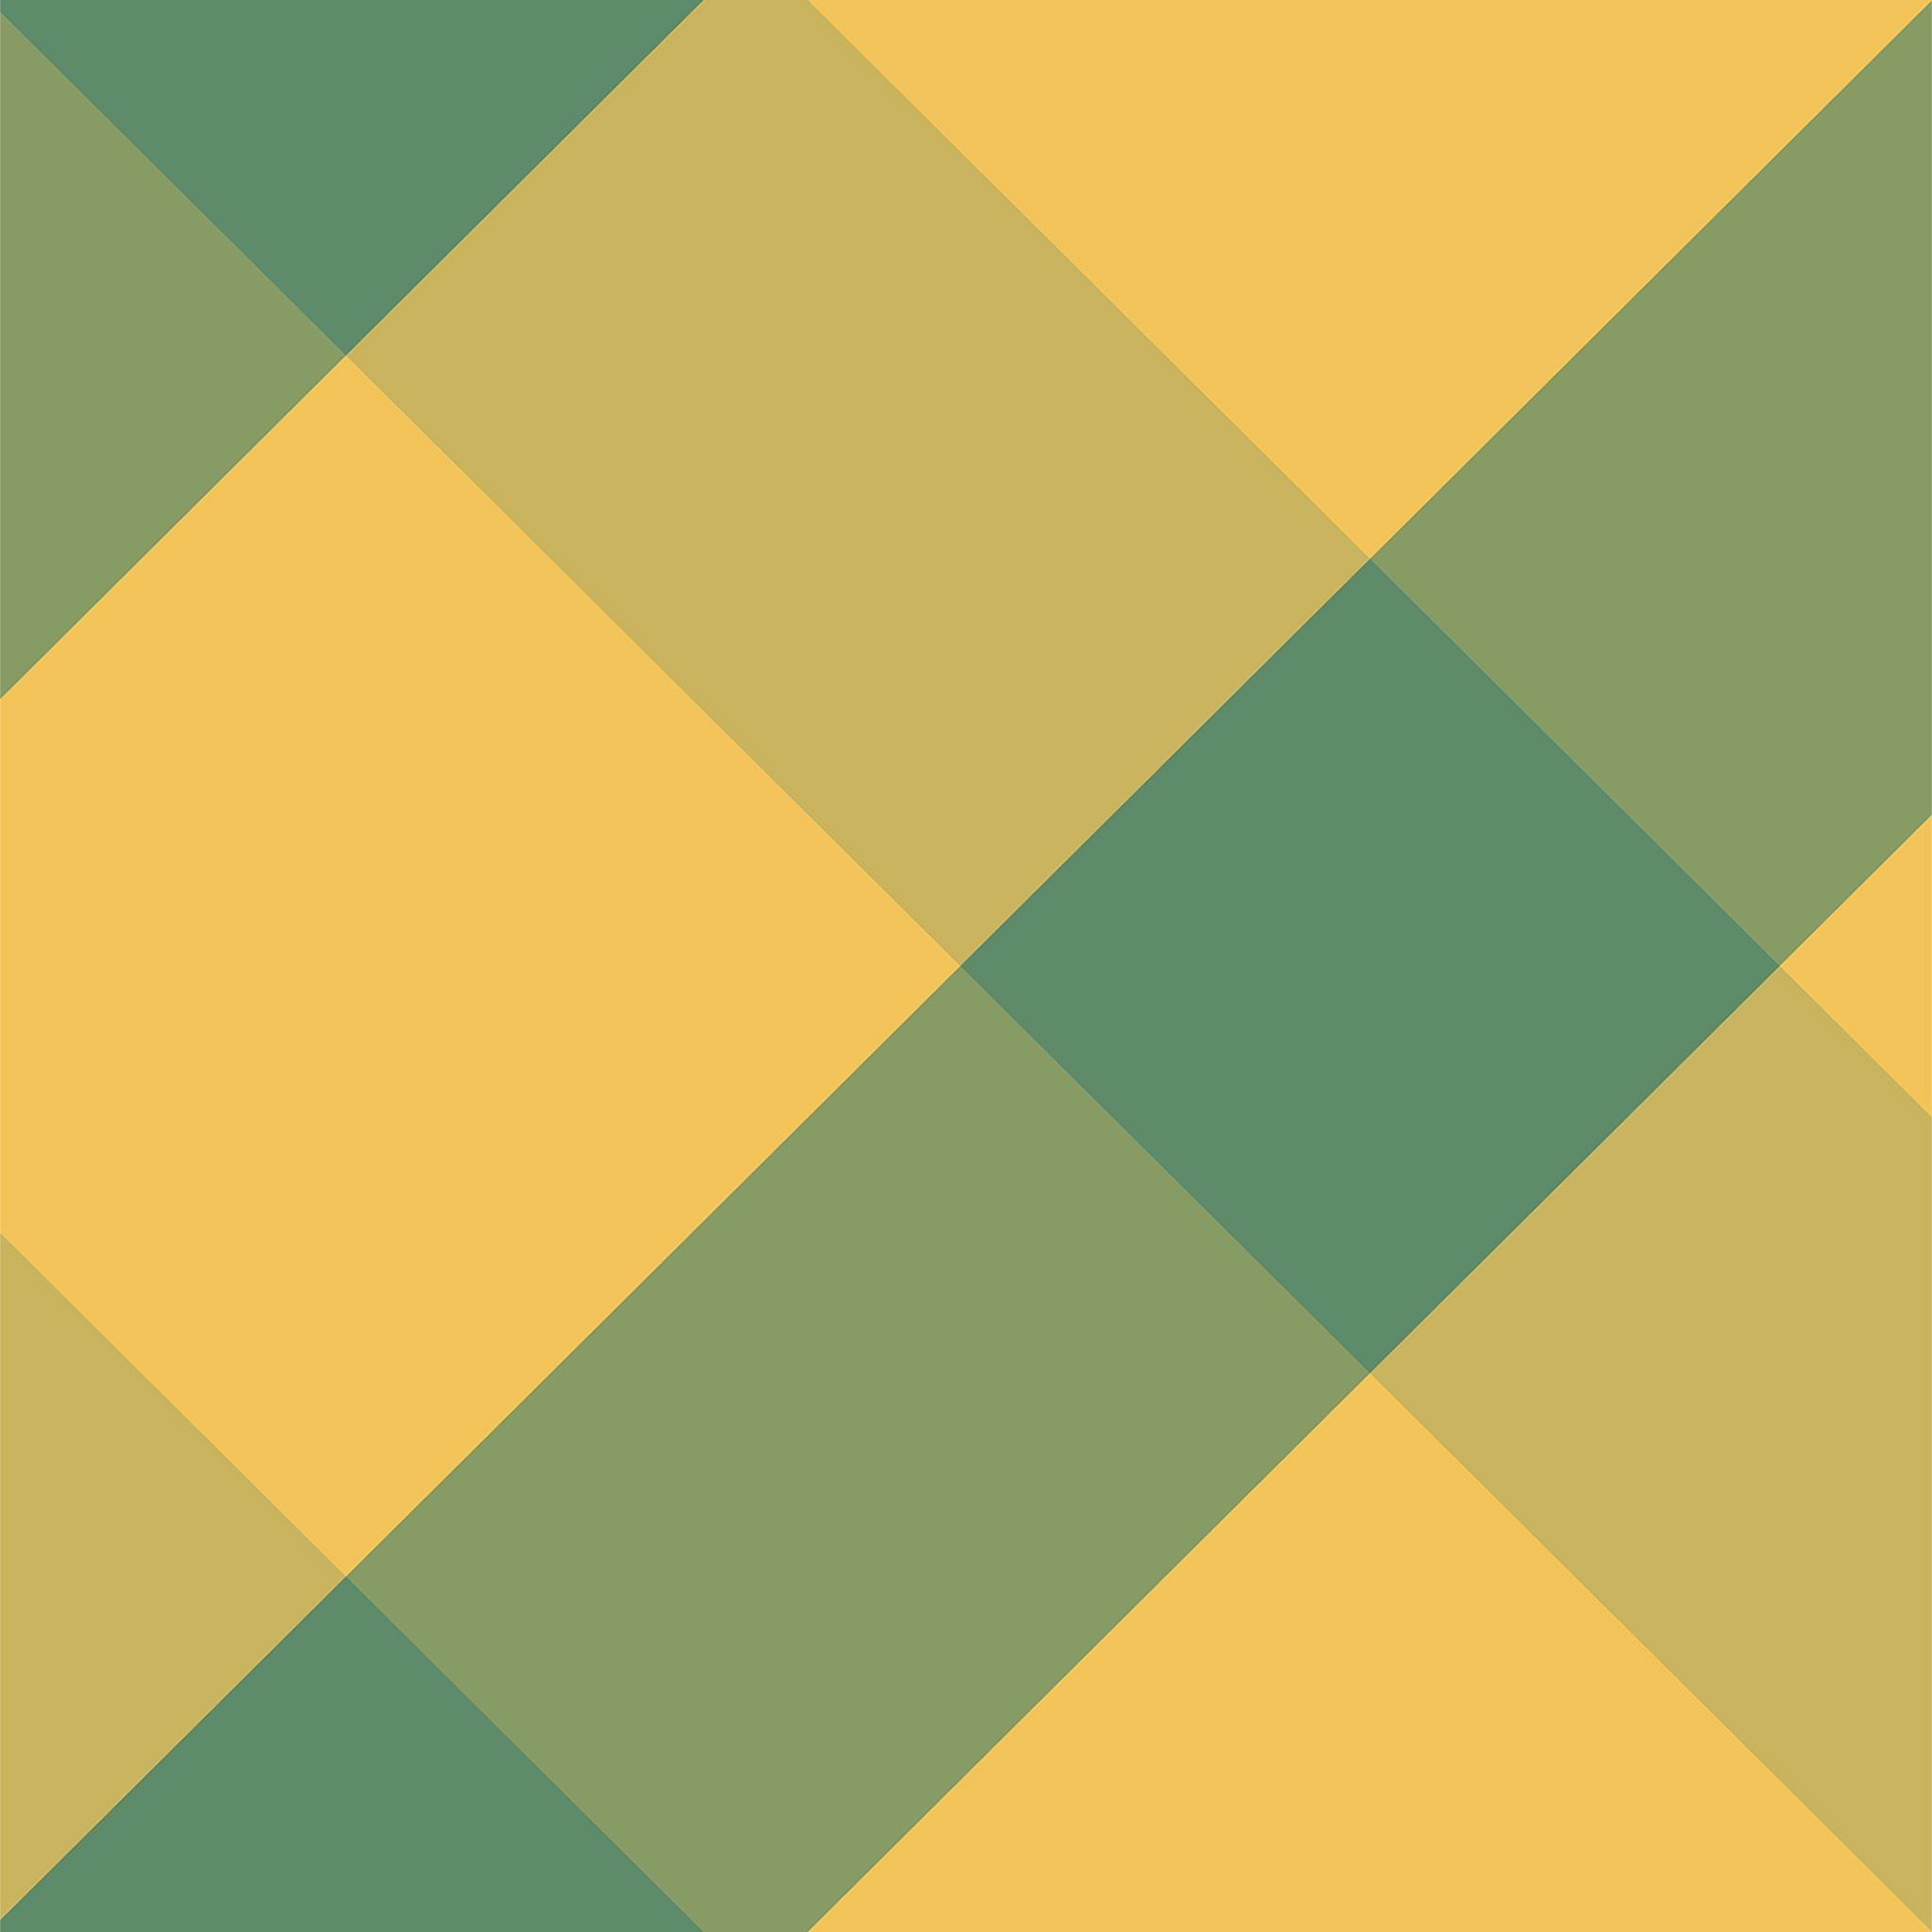 Lines Green Yellow Rectangle Abstract Pattern iPad Air Wallpaper Free Download